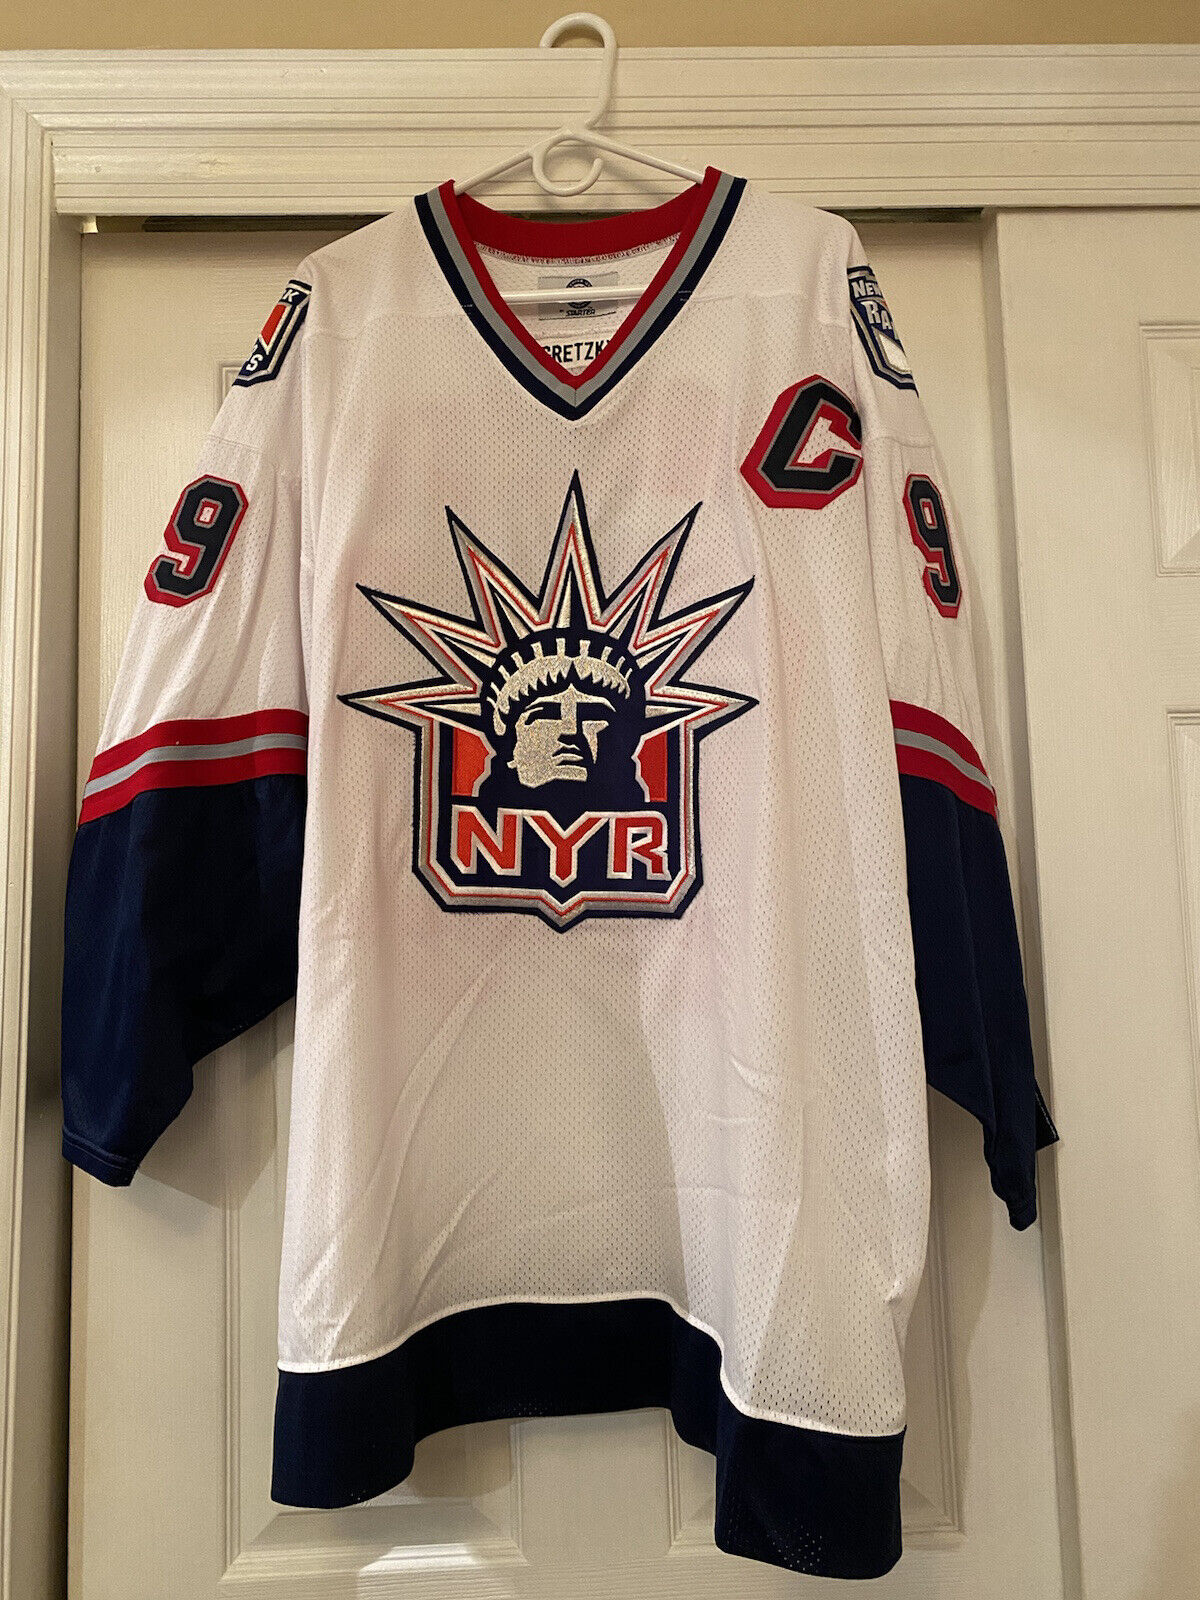 Wayne Gretzky Game Used Jersey New York Rangers White Statue of Liberty 1998-99